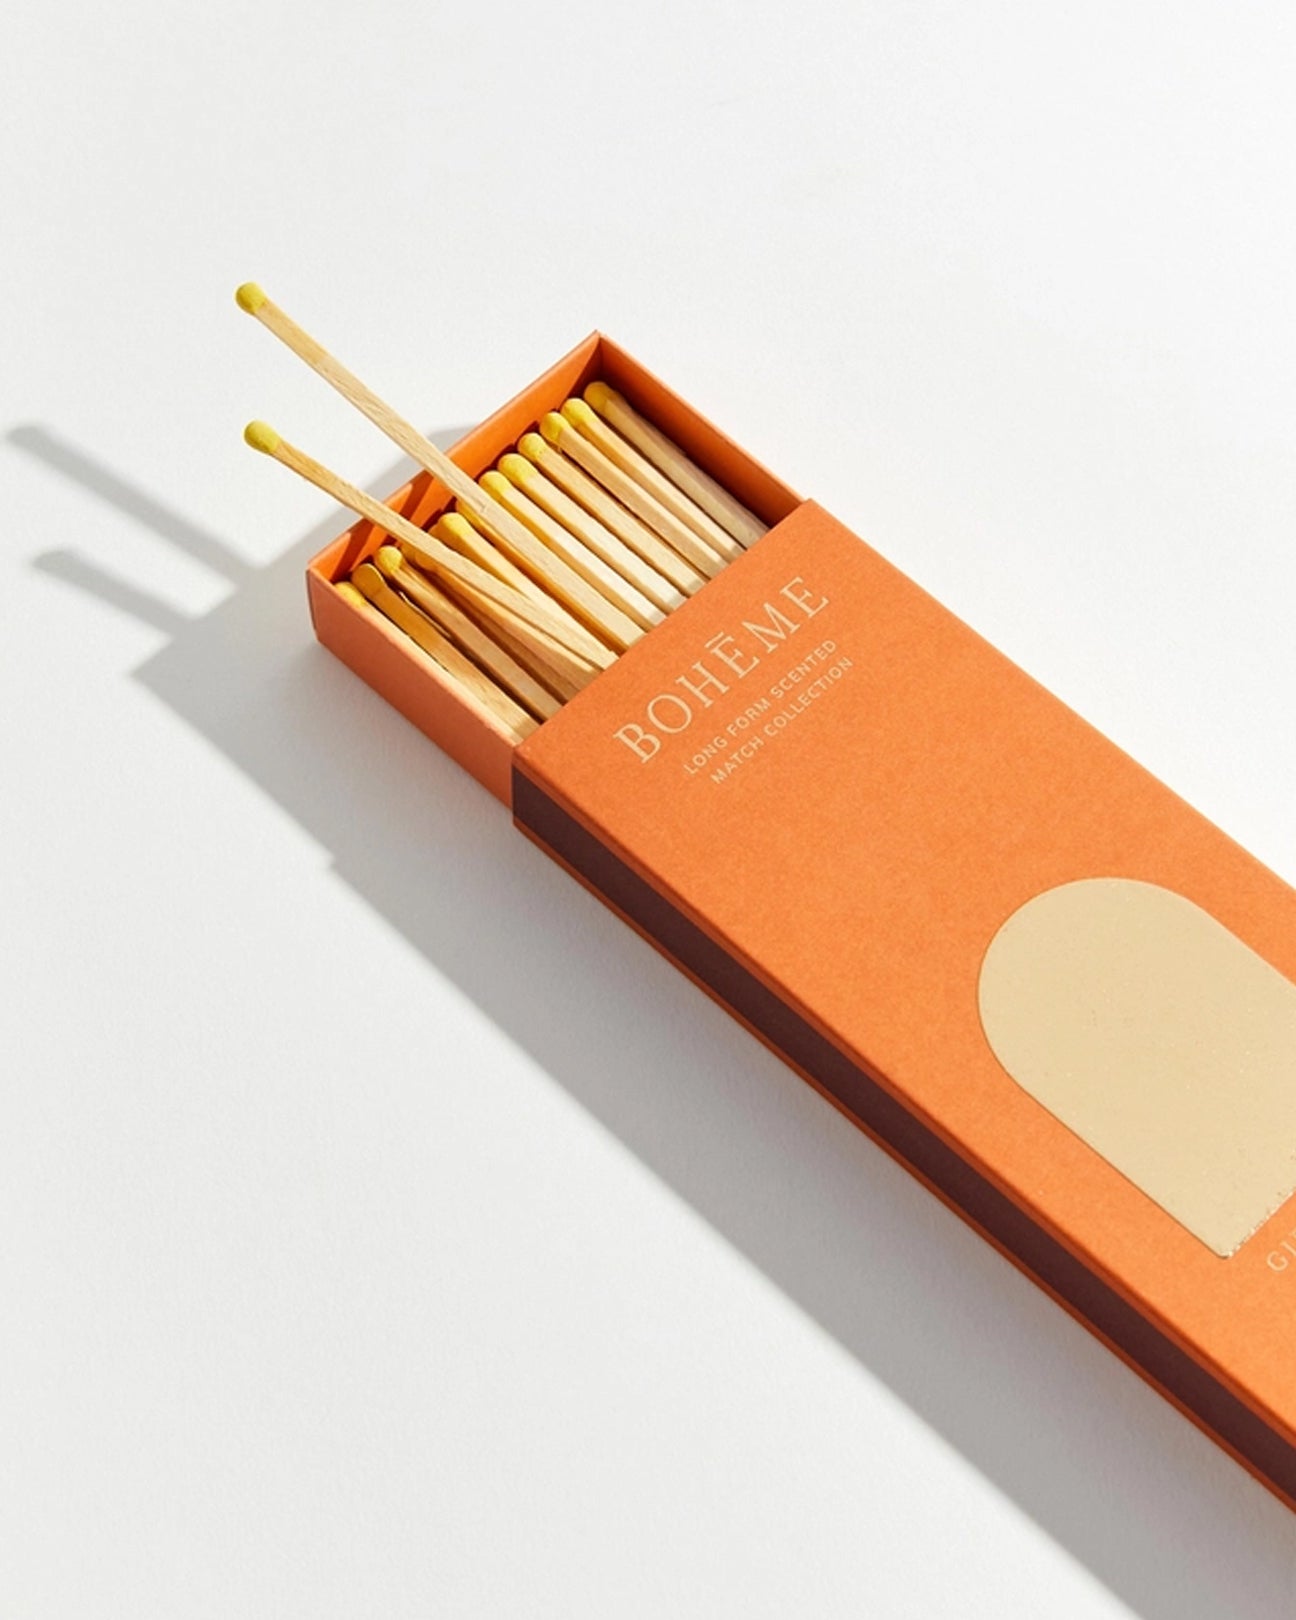 BOHEME FRAGRANCES Girl on Fire Perfumed Matches in Phoenix available at Lahn.shop